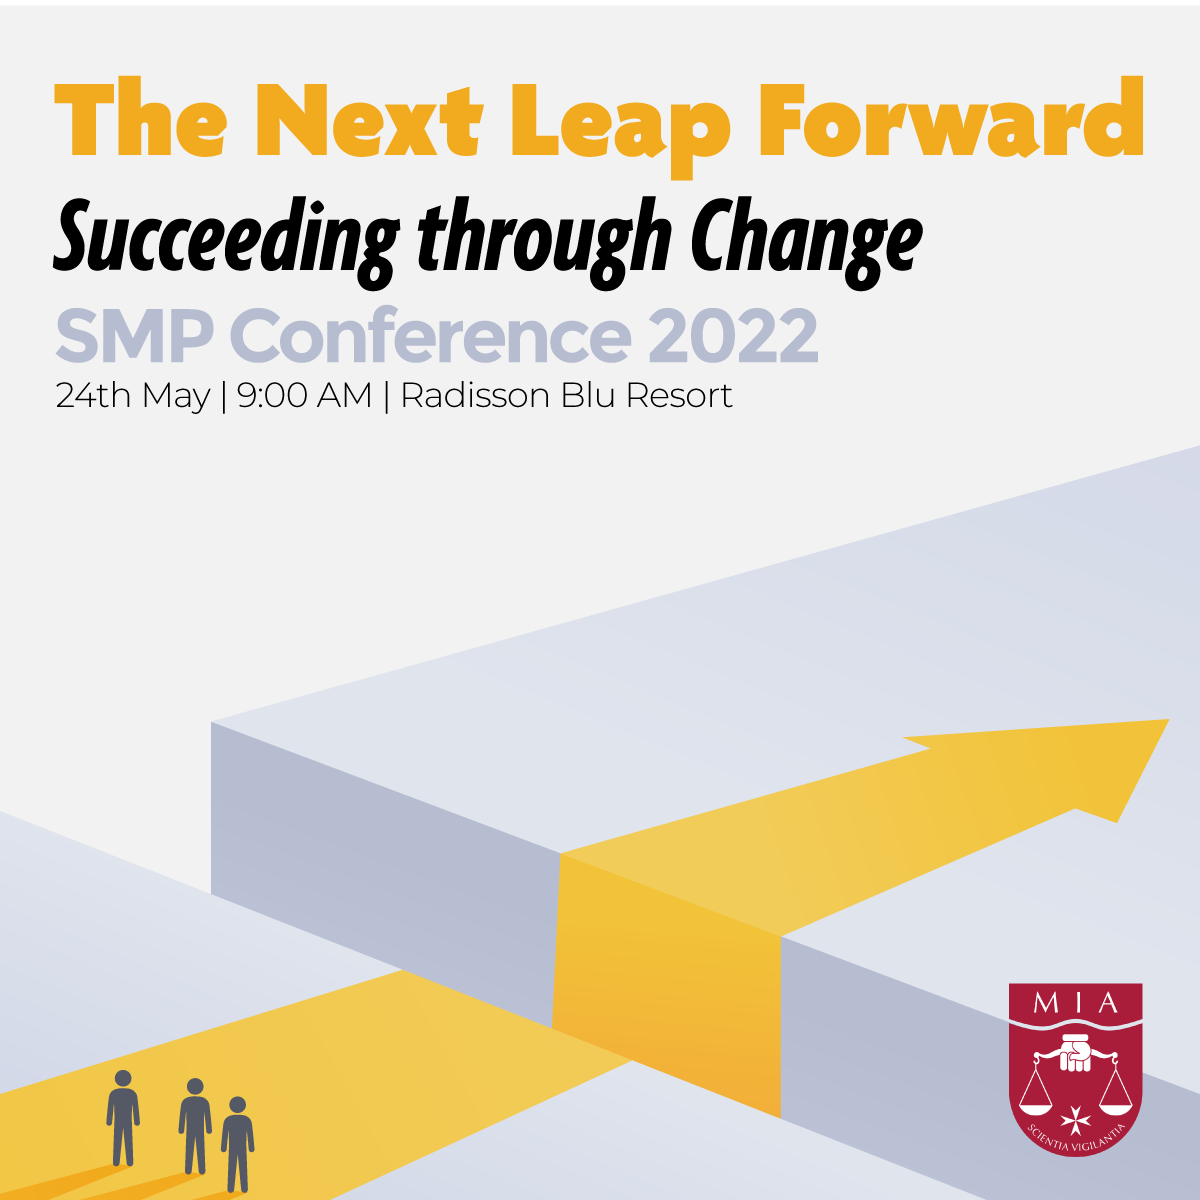 SMP Conference 2022 – The Next Leap Forward Succeeding Through Change